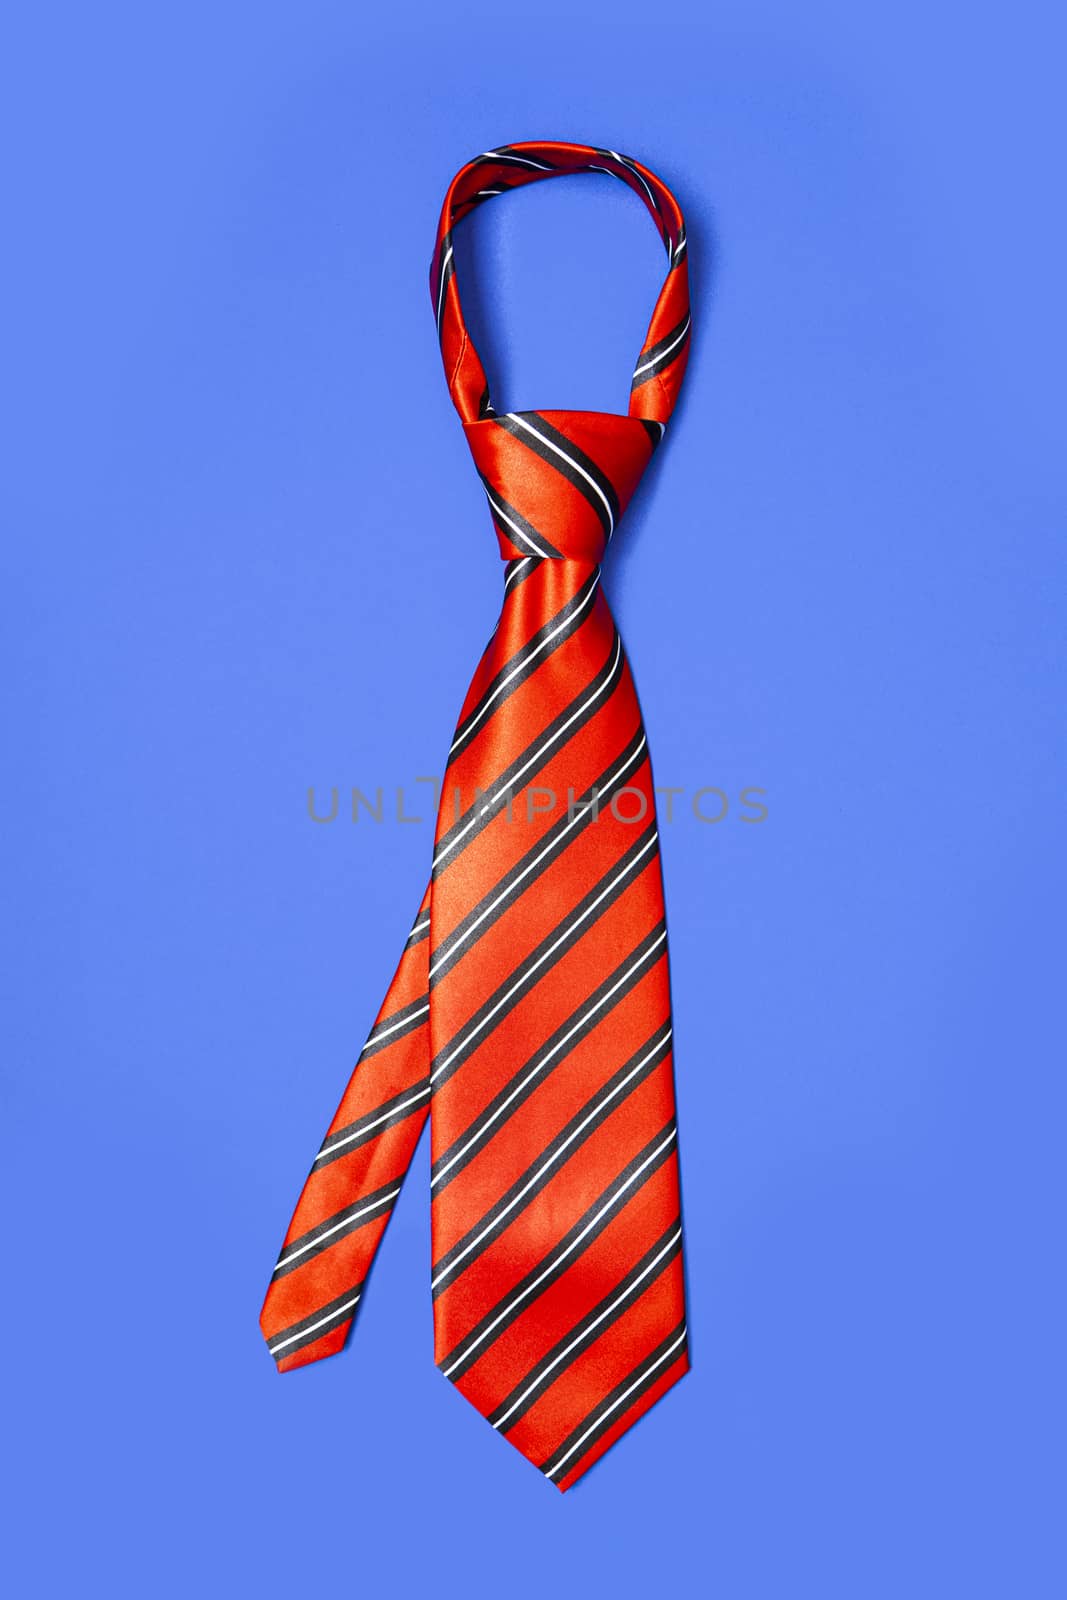 Red men's striped tie taken off for leisure time, isolated on blue background.